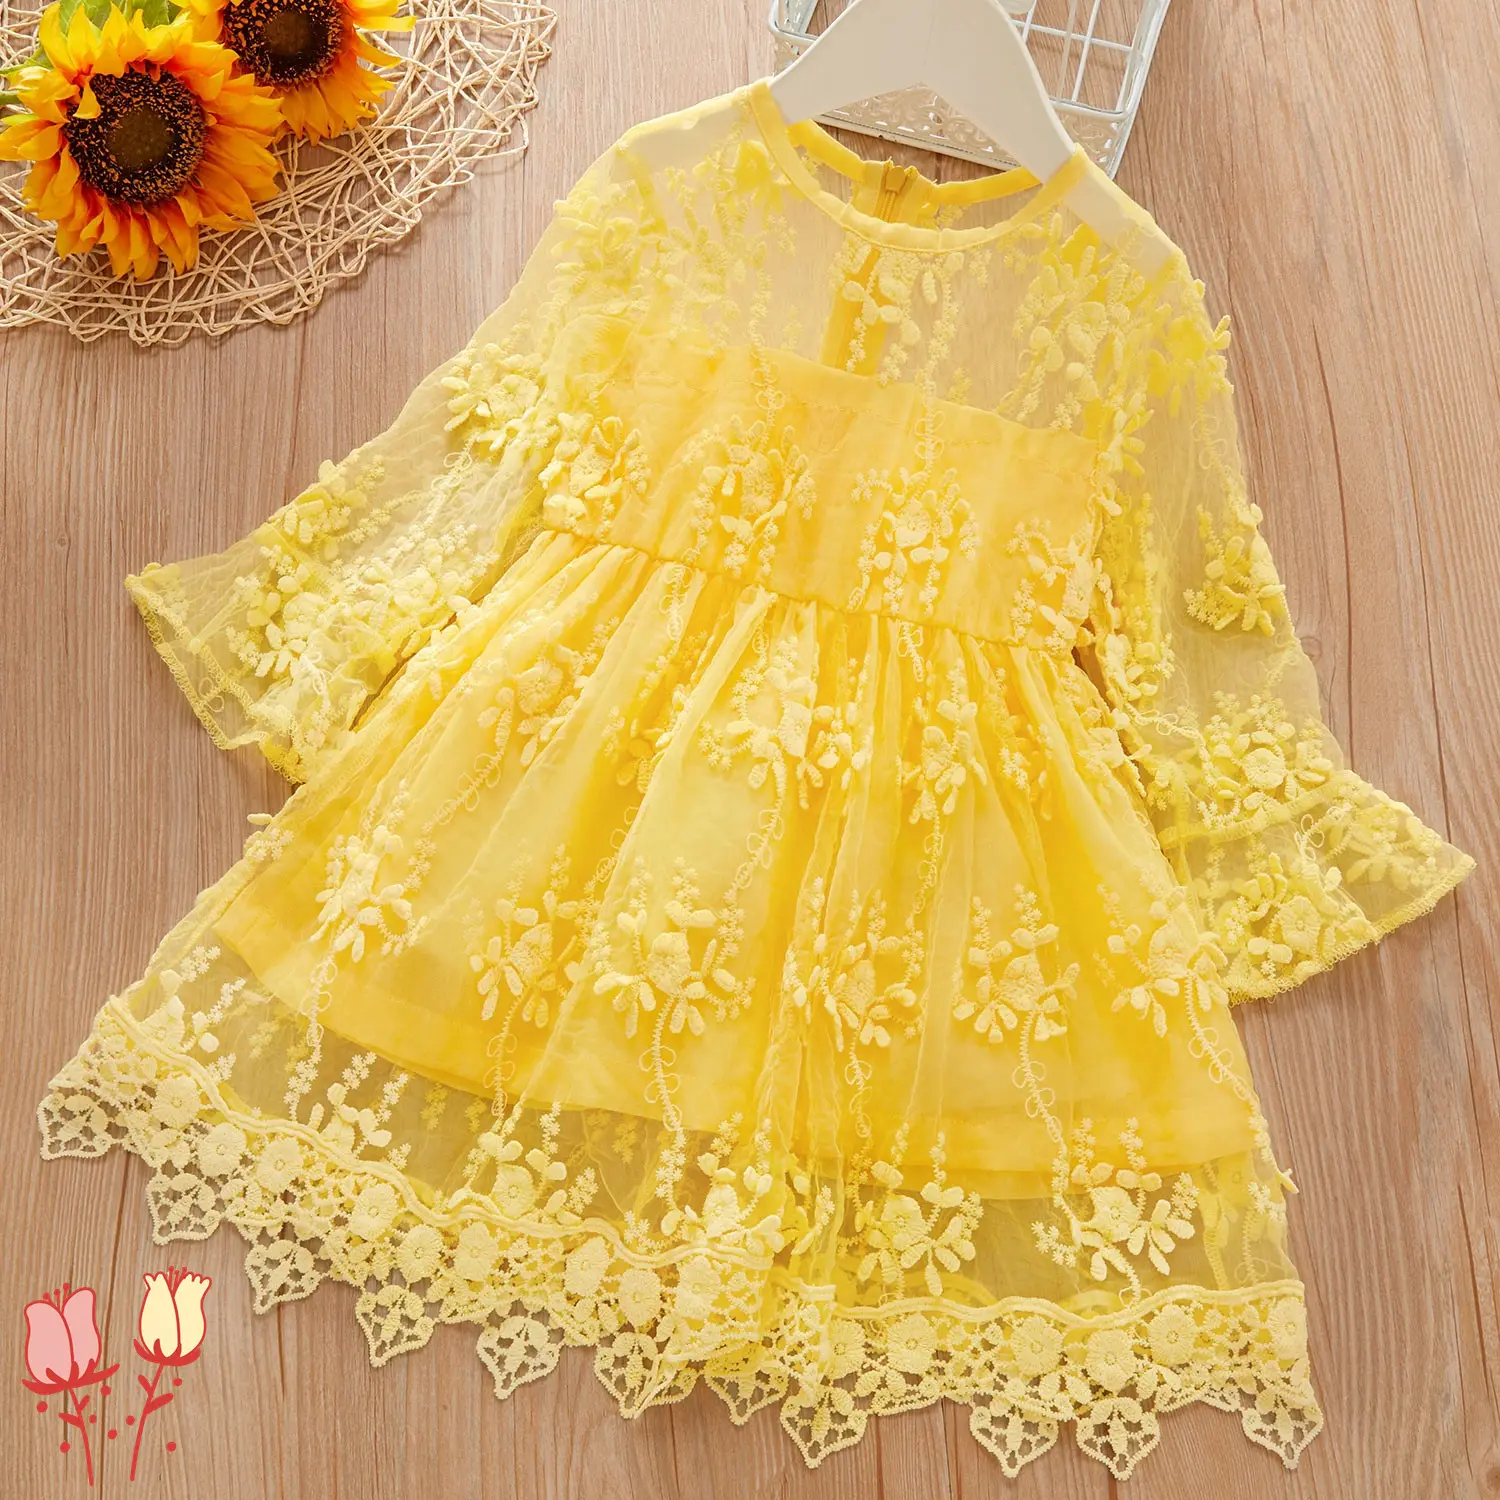 Infant high quality kids girls dress Hollow out lace princess pretty small girls frock 2-7years baby girls dresses